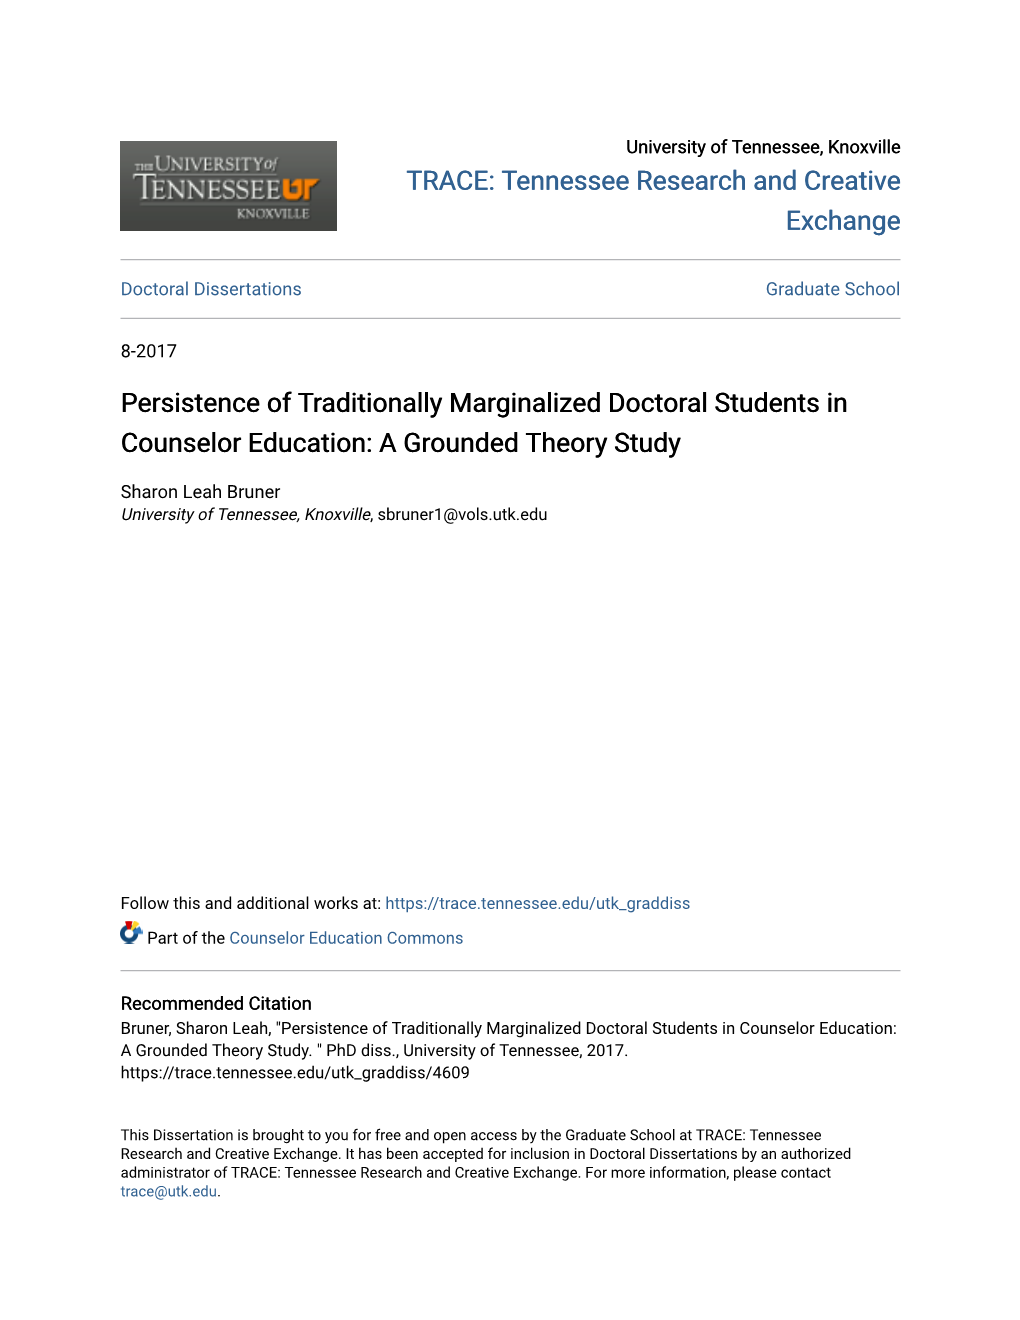 Persistence of Traditionally Marginalized Doctoral Students in Counselor Education: a Grounded Theory Study